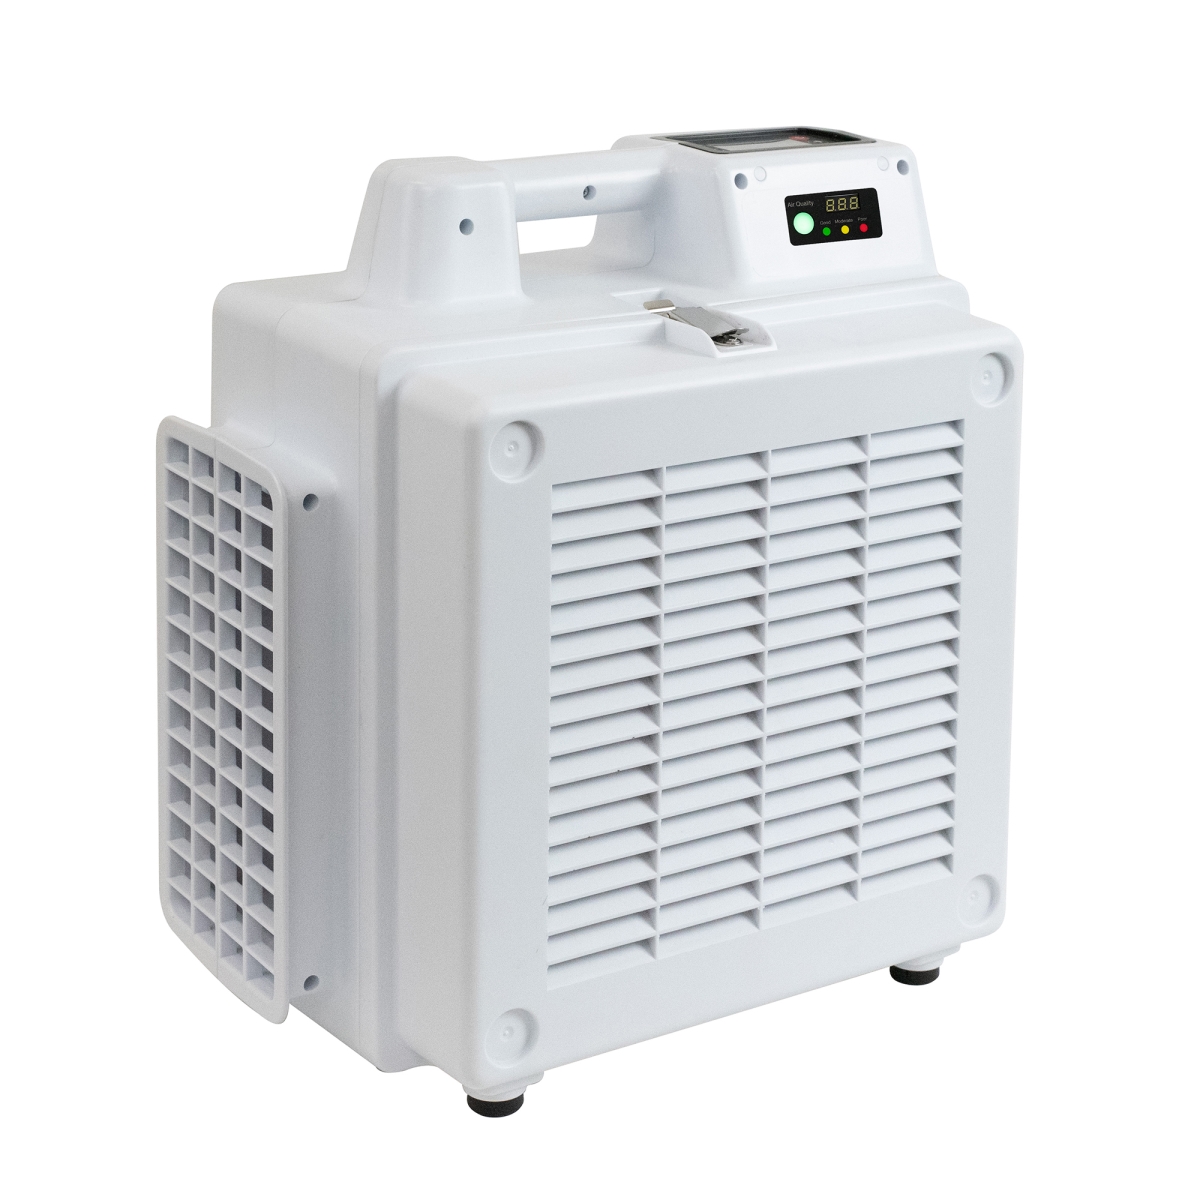 Picture of Xpower X-2800 Commercial 3 Stage Filtration HEPA Purifier System with Airborne Air Cleaner Mini Air Scrubber & PM2.5 Air Quality Sensor